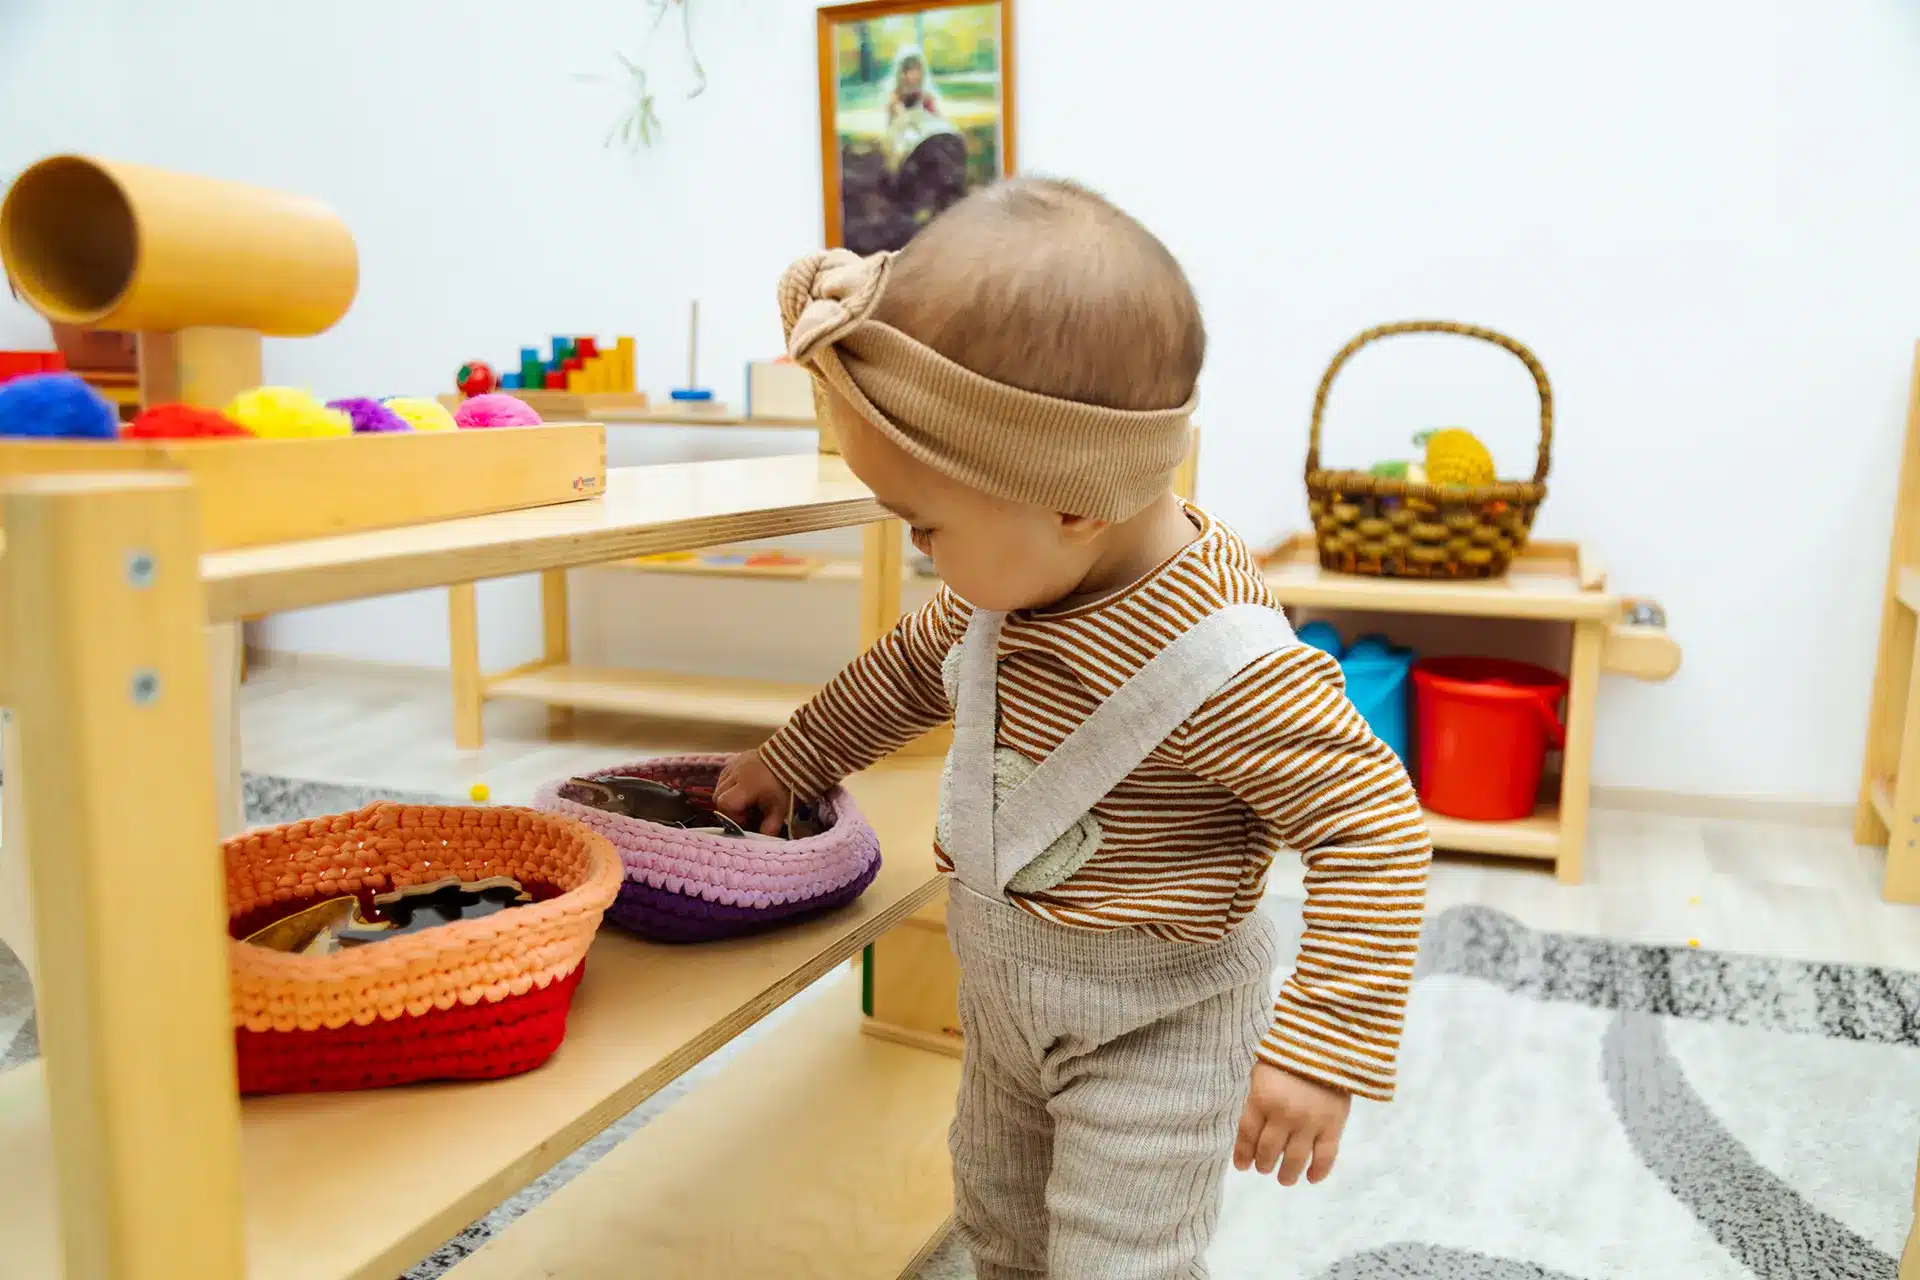 A child plays with educational wooden toys in a playroom.